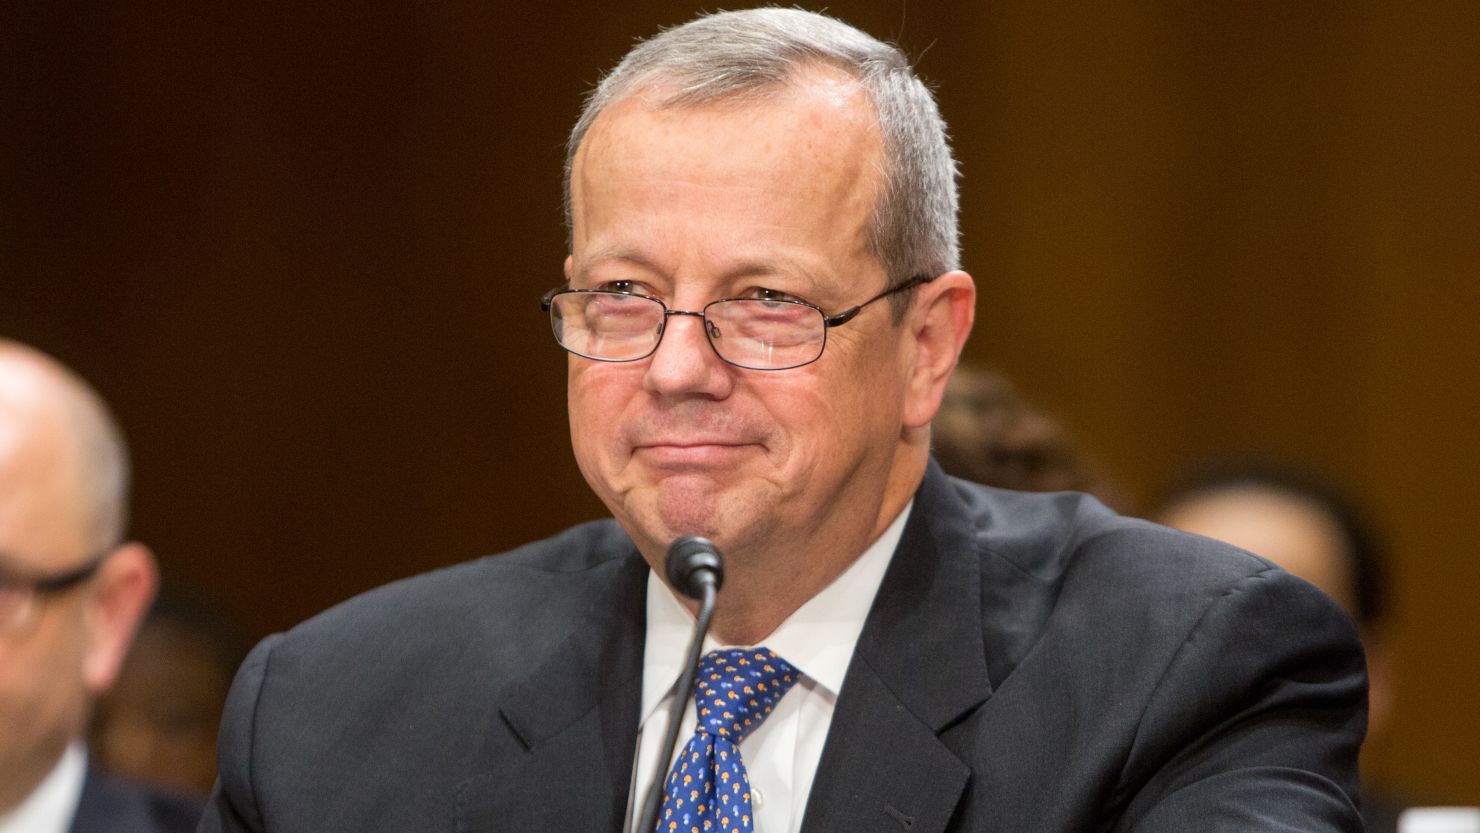 Retired Marine Gen. John Allen testifies during a Senate Foreign Relations Committee hearing on Capitol Hill in Washington, DC, on October 28, 2015.